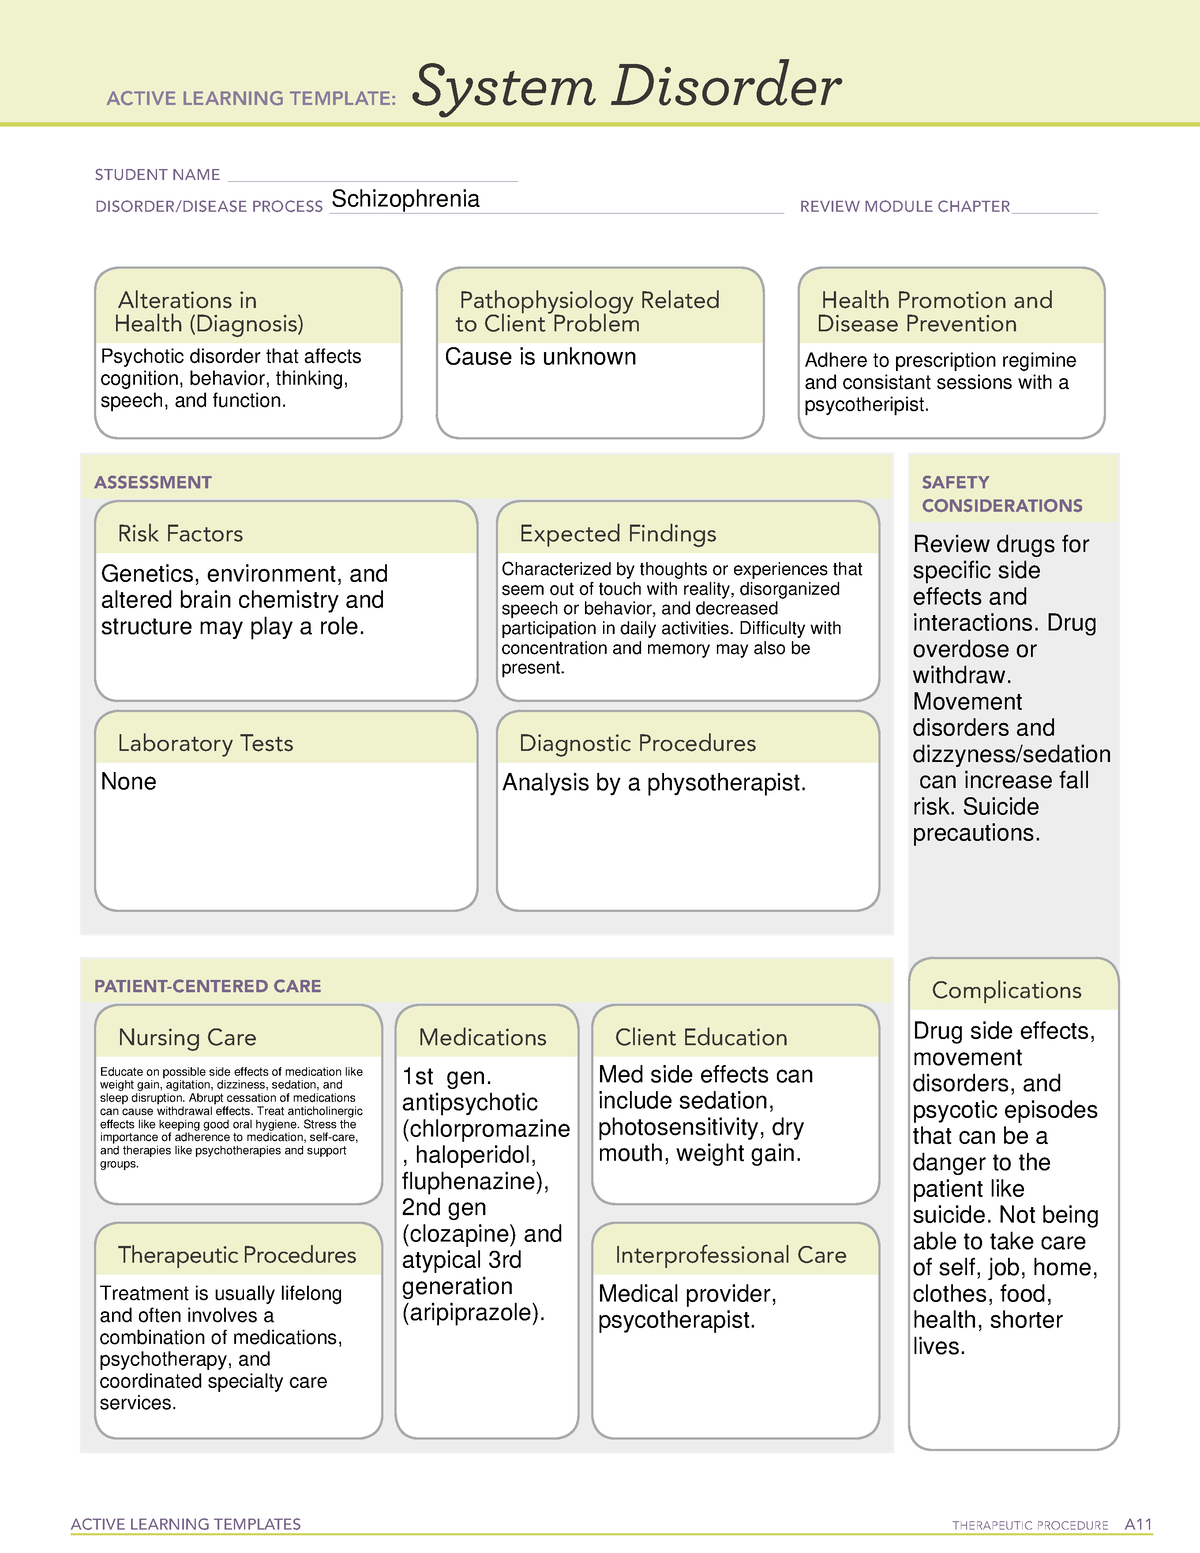 Schizophrenia System Disorder Template ATI - ACTIVE LEARNING TEMPLATE ...